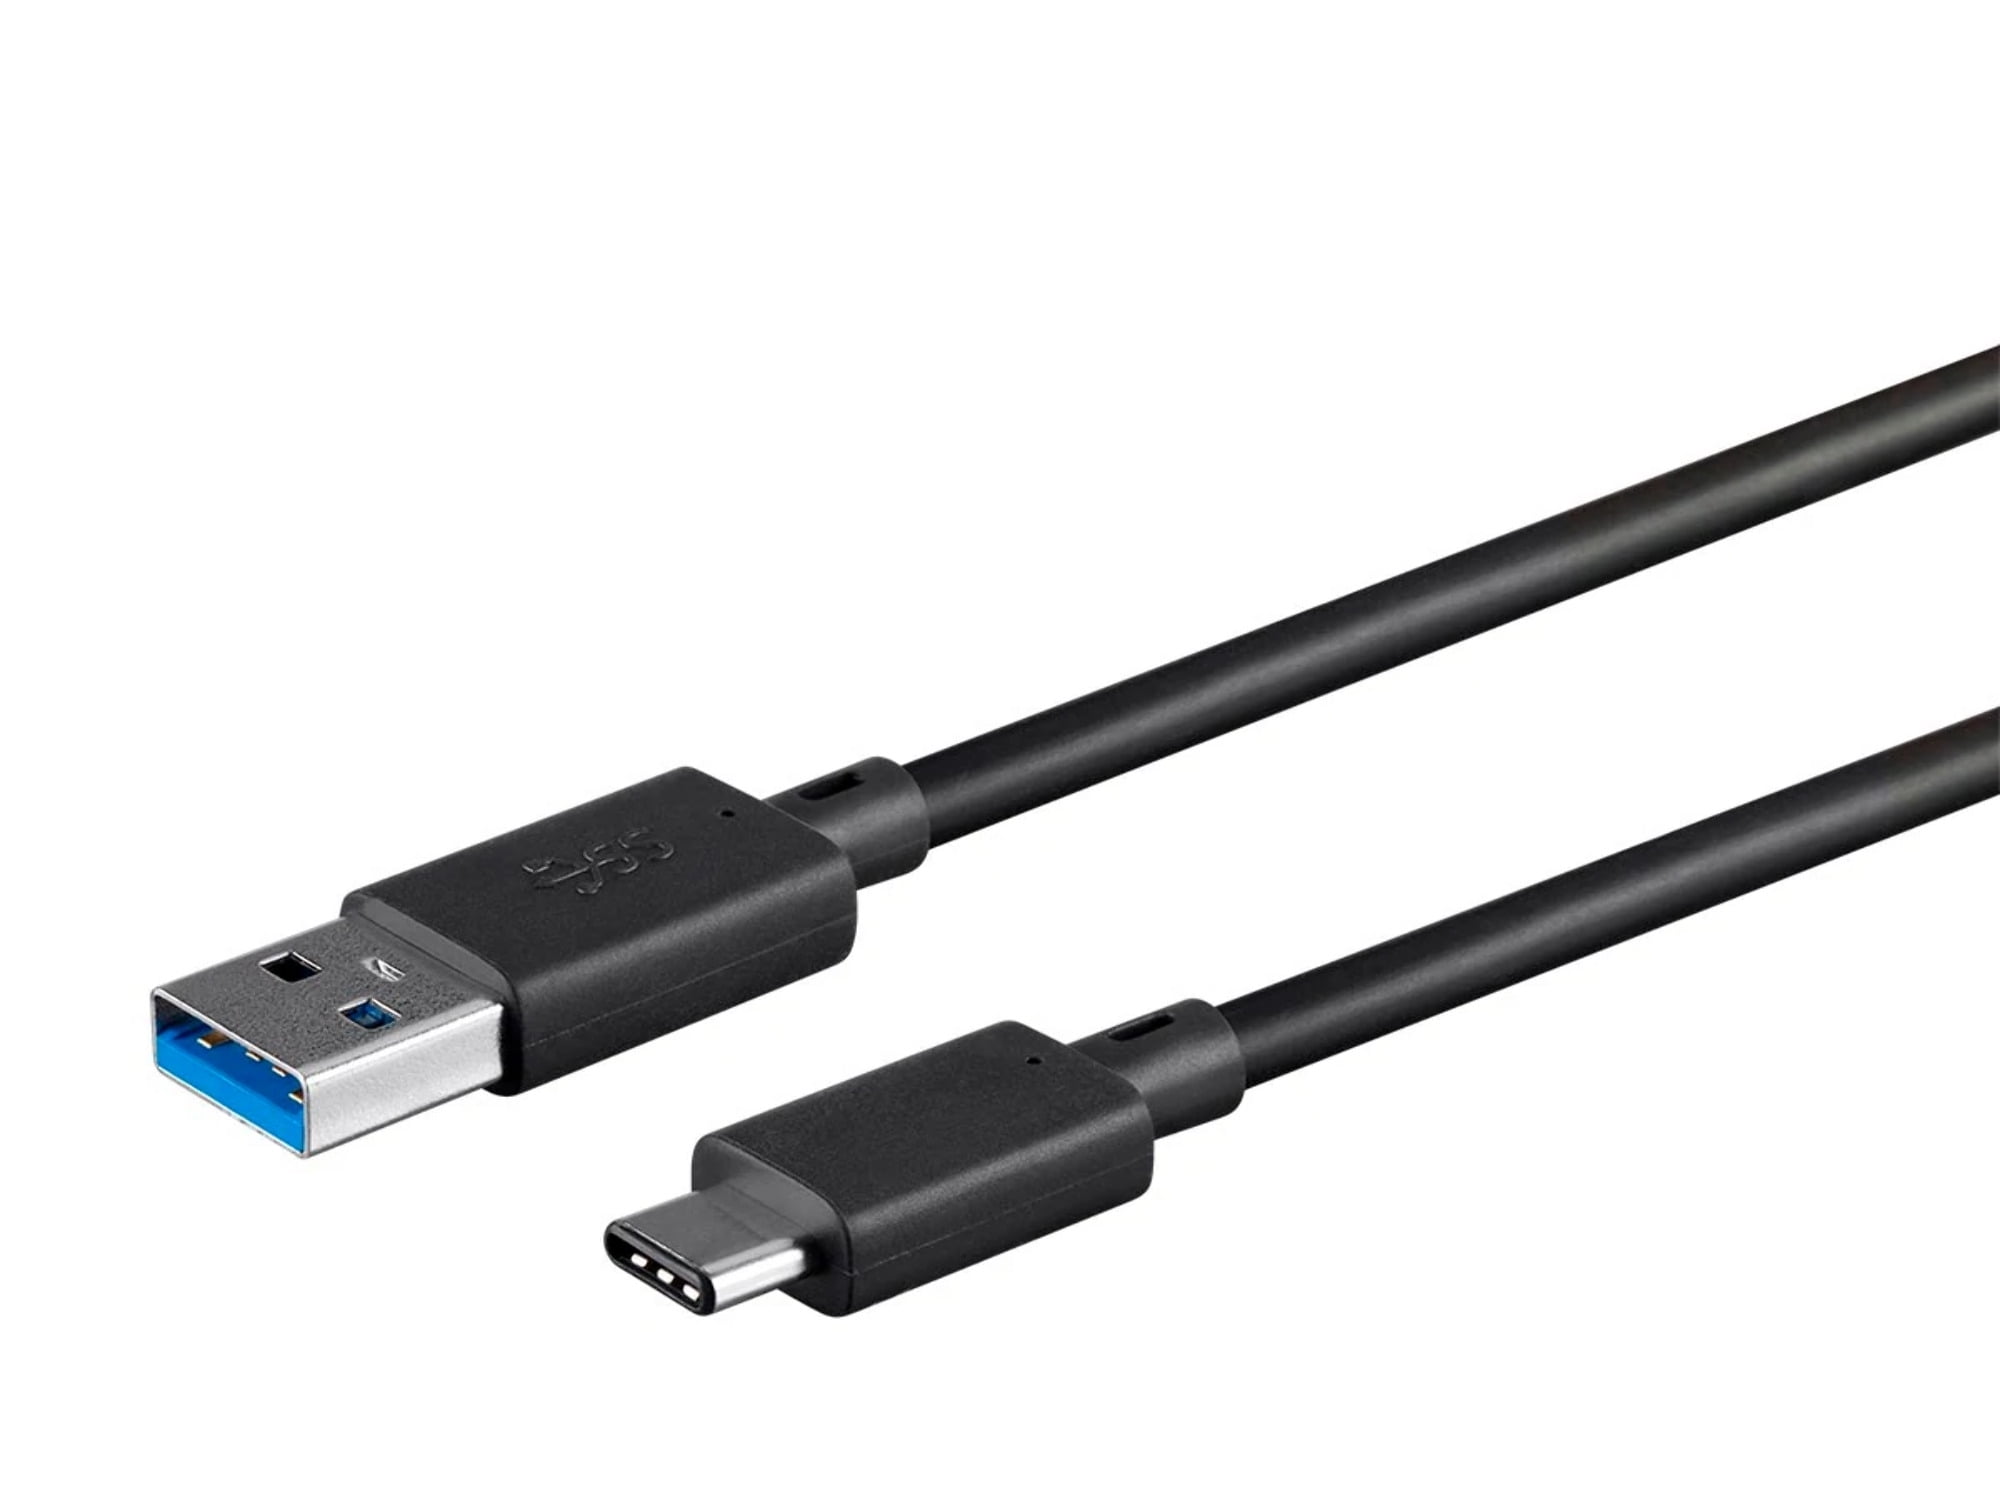 CABLE USB TIPO C - TIPO C 3.0